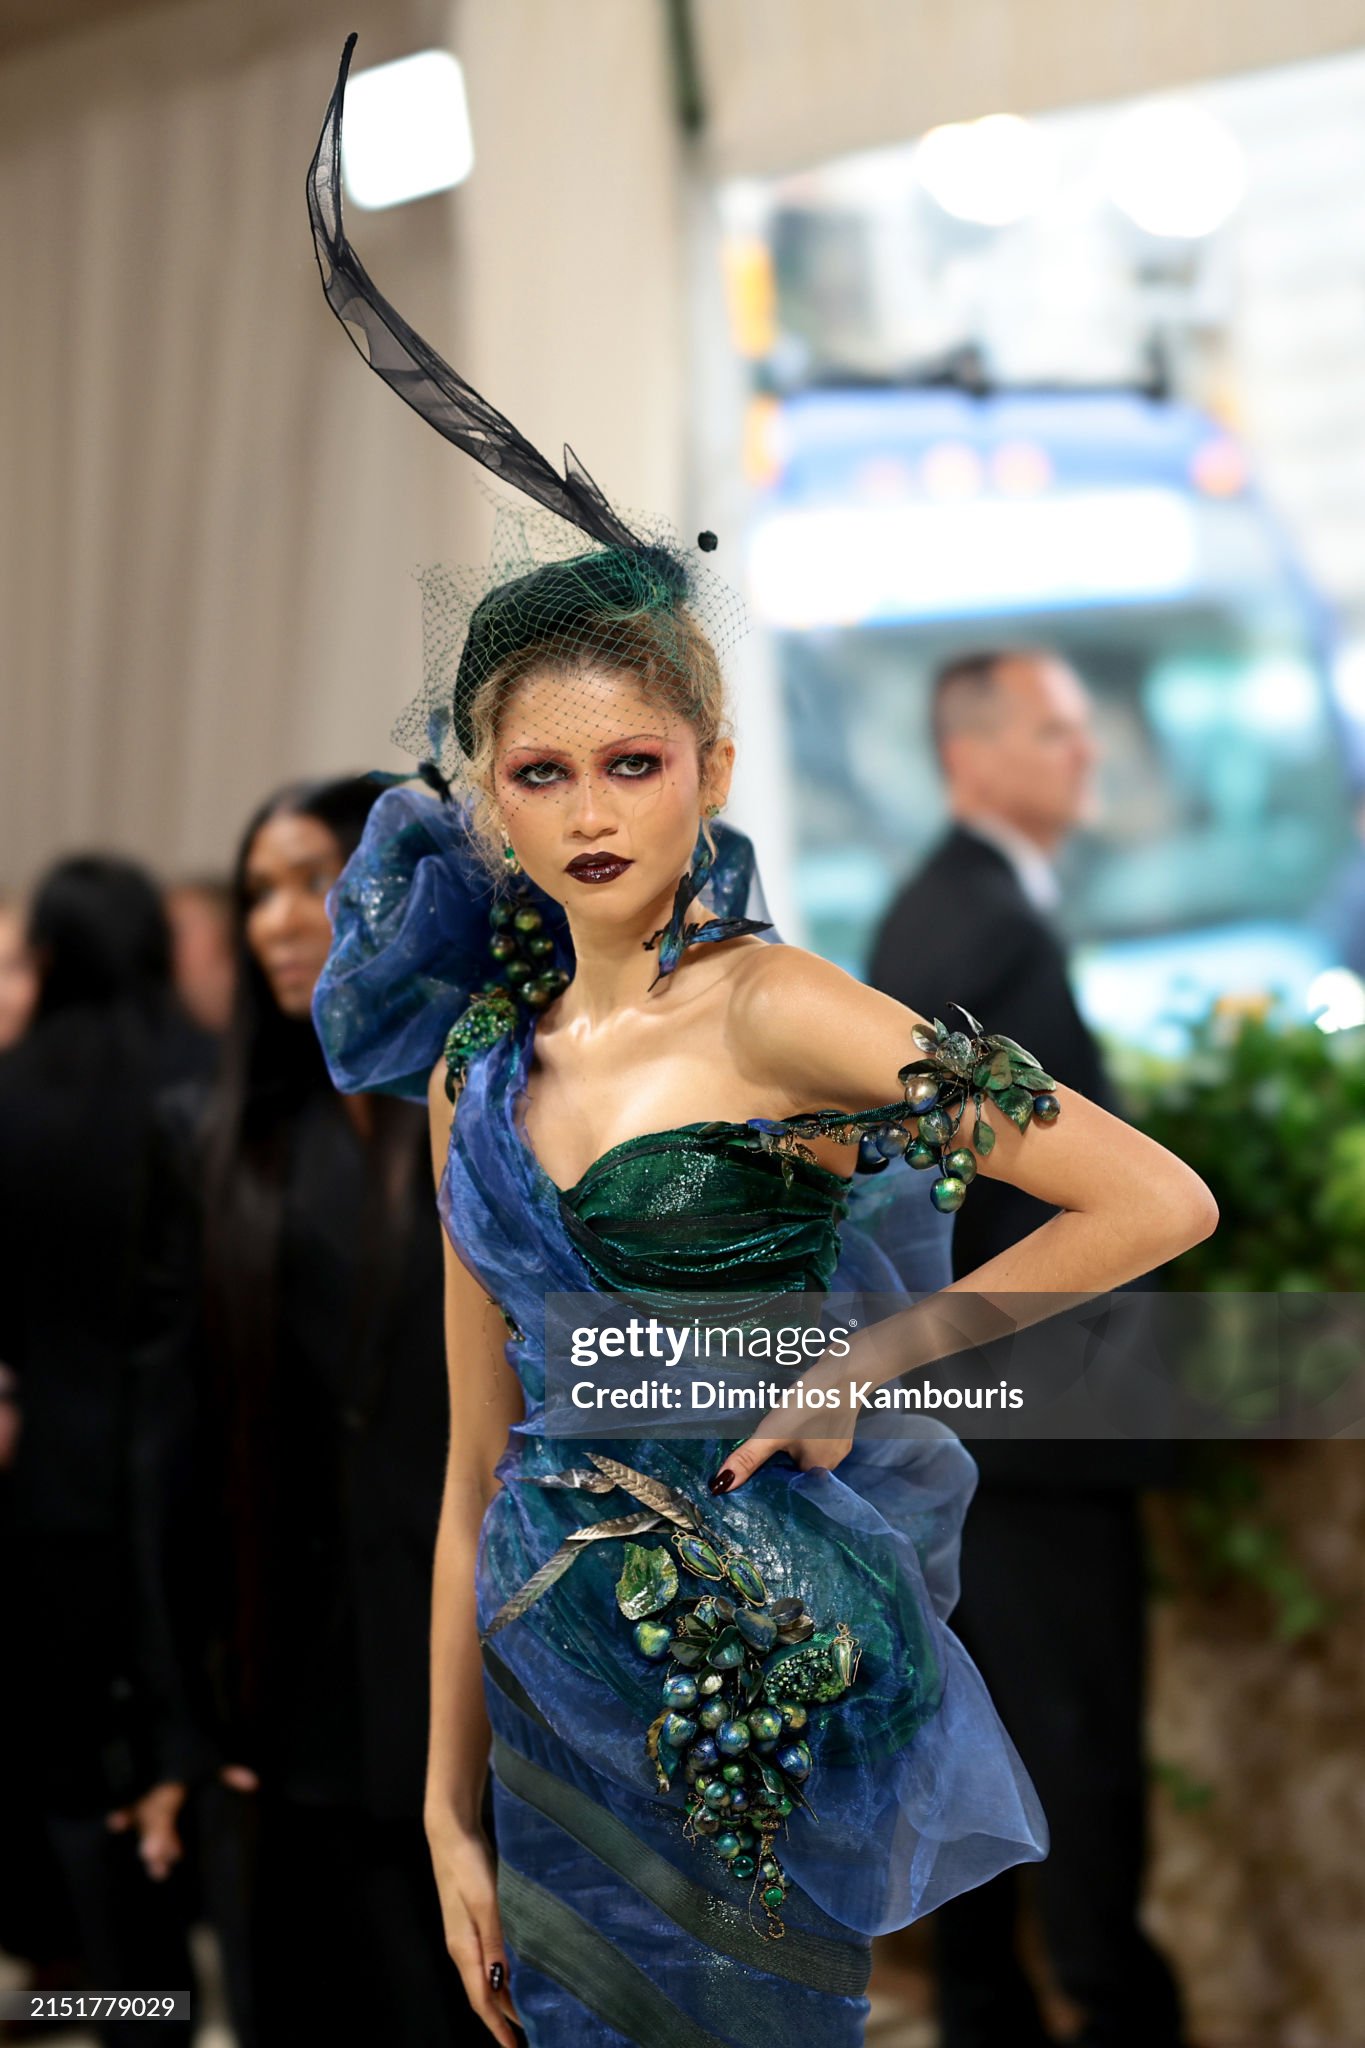 gettyimages-2151779029-2048x2048.jpg